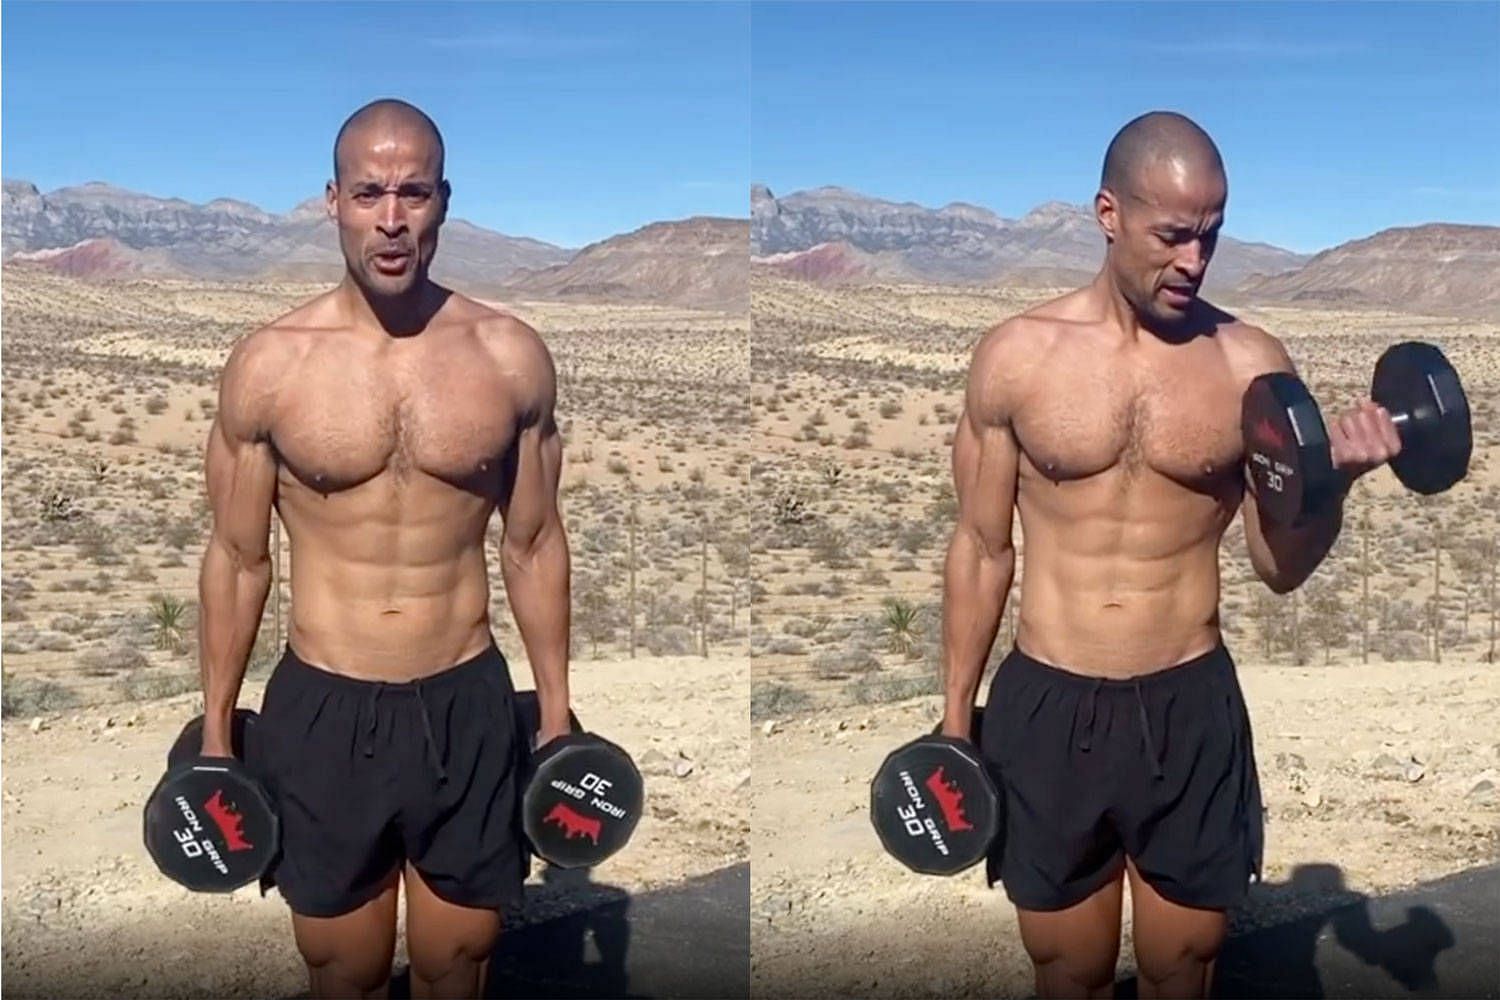 What is the David Goggins challenge and was he a Navy SEAL?